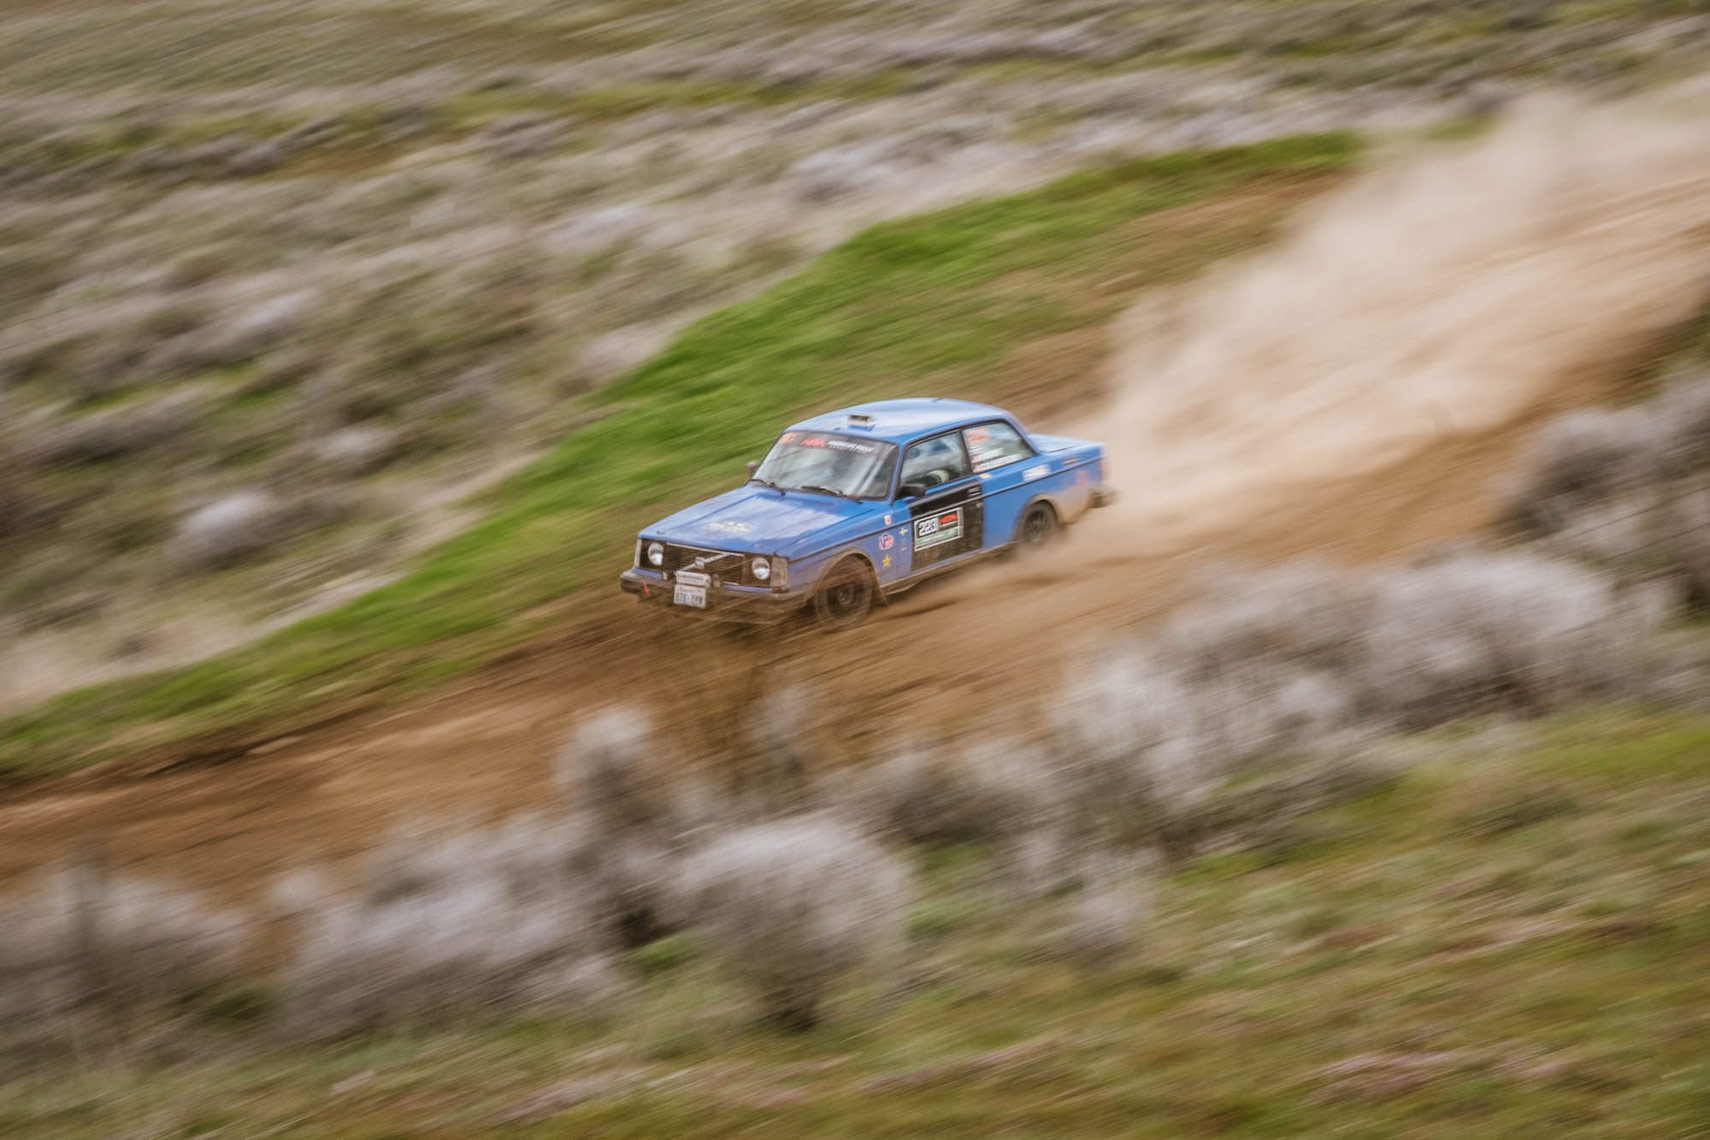 Volvo rally car in the dust at Oregon trail rally